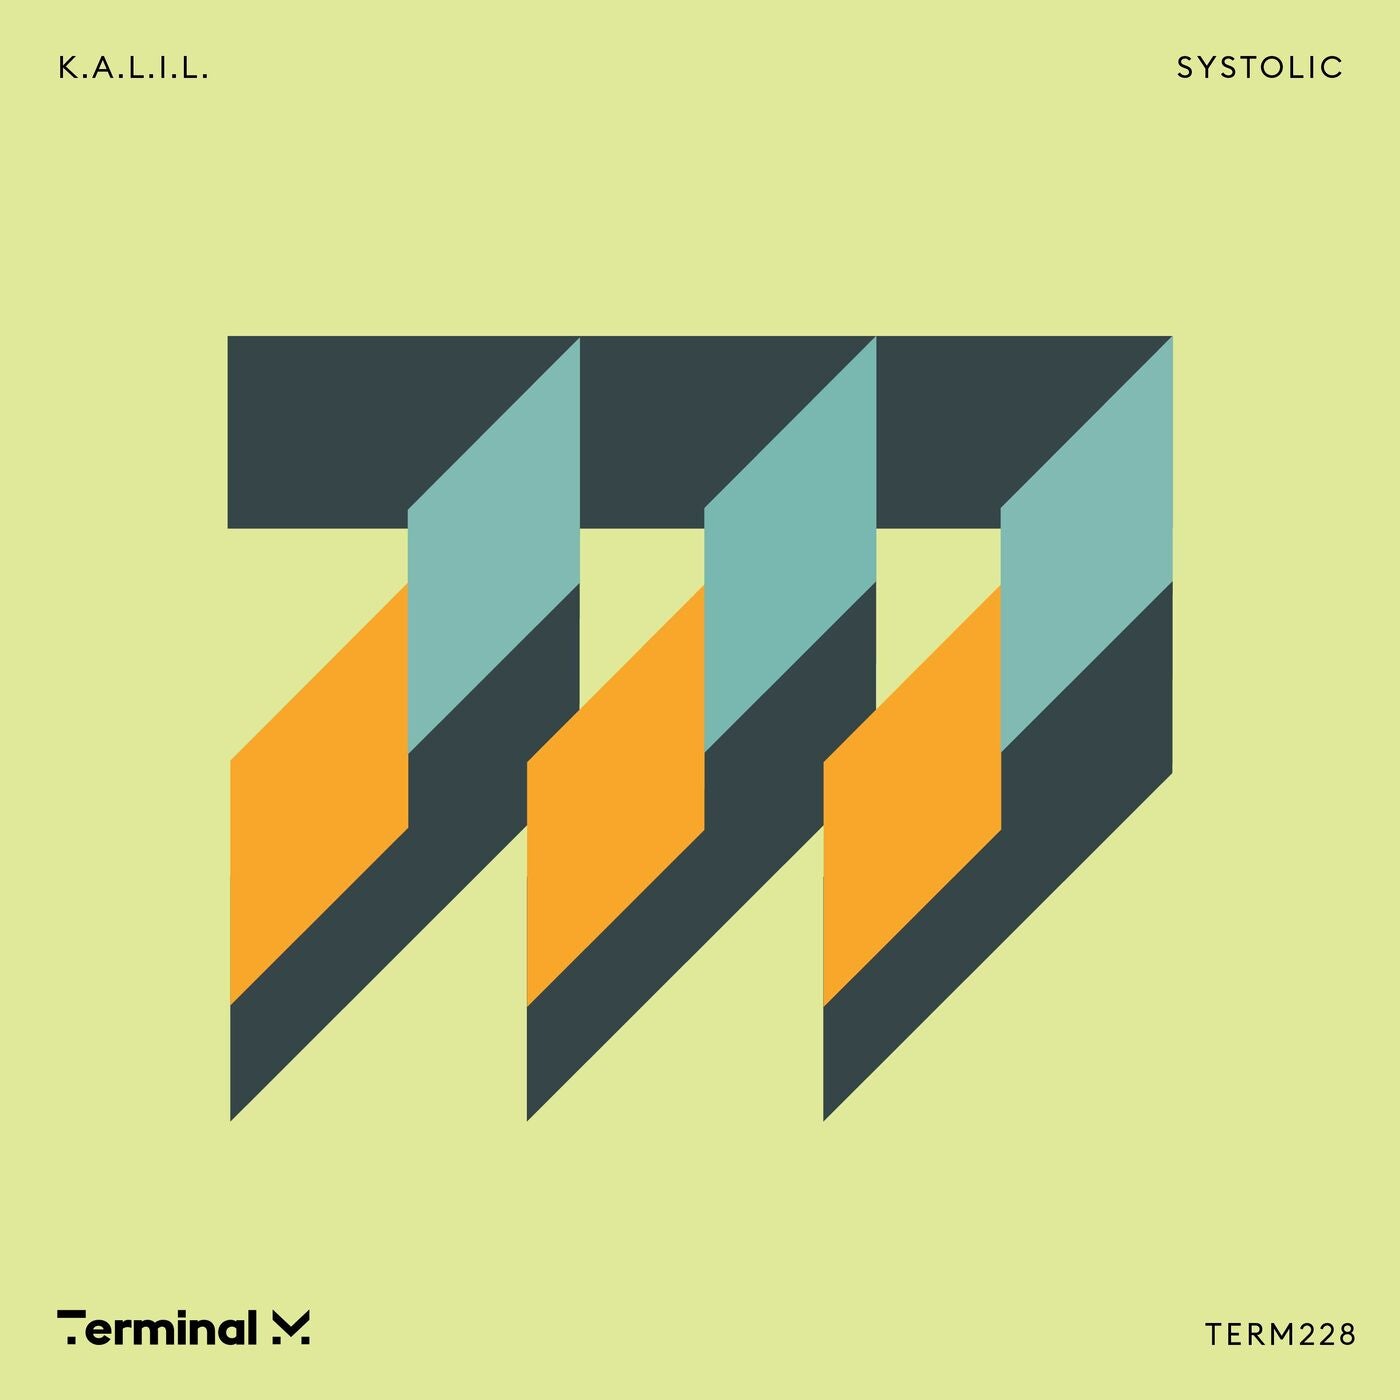 image cover: K.A.L.I.L. - Systolic on Terminal M